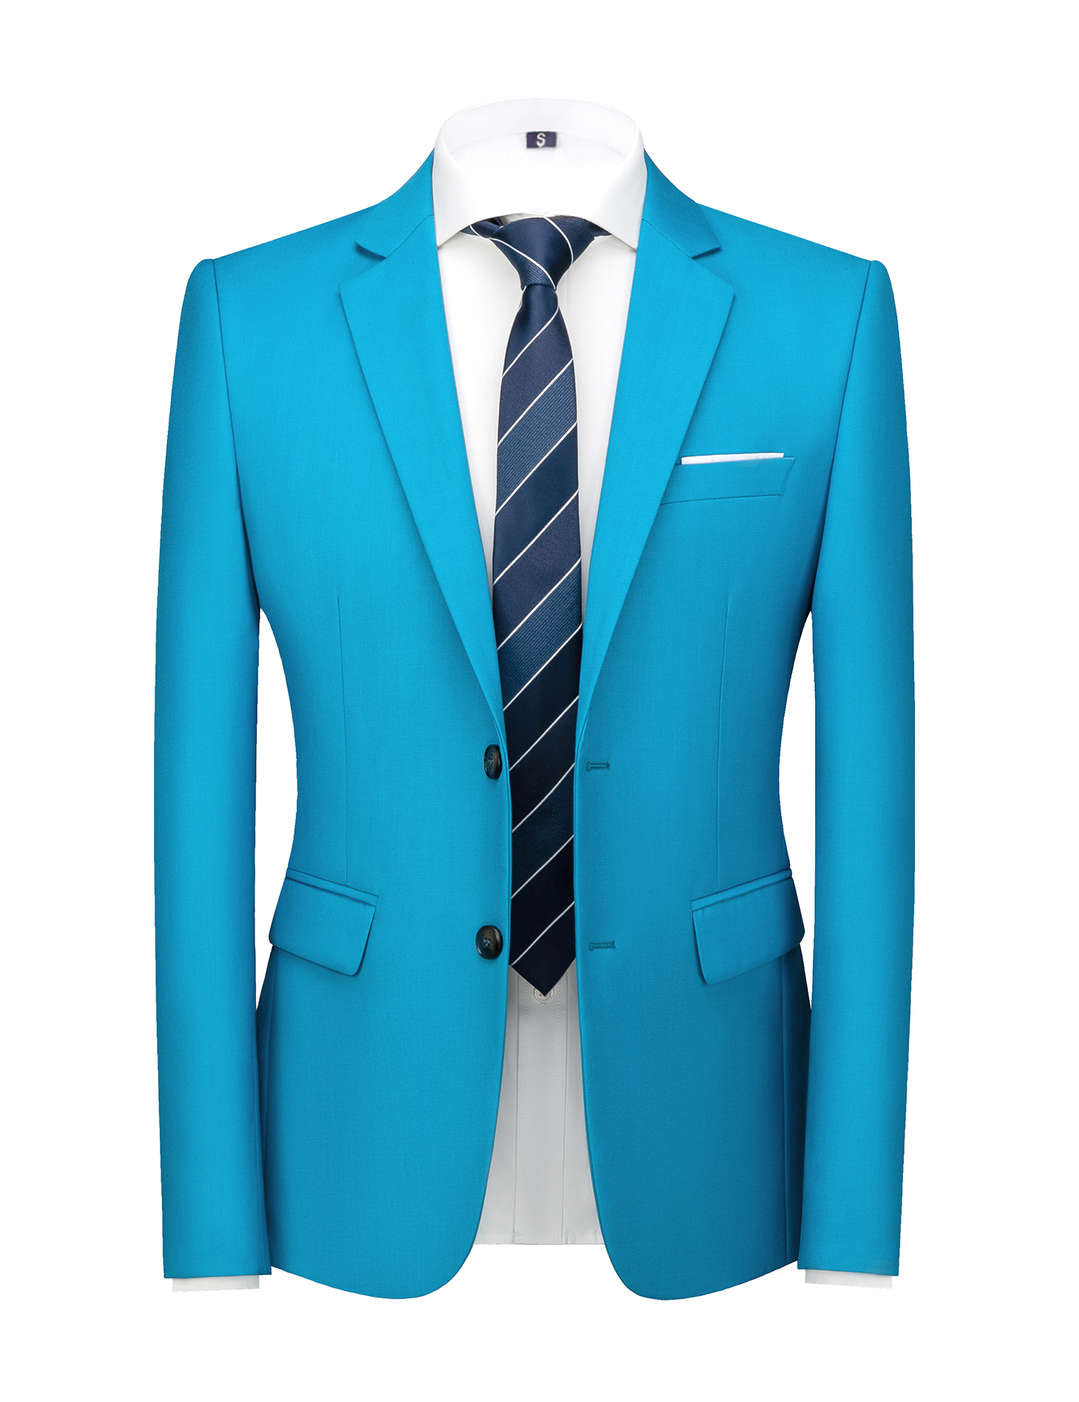 MEN BLAZERS COLORFUL AND PRINTED SLIM FIT SUIT JACKET FOR PROM WEDDING –  MOGU SUIT